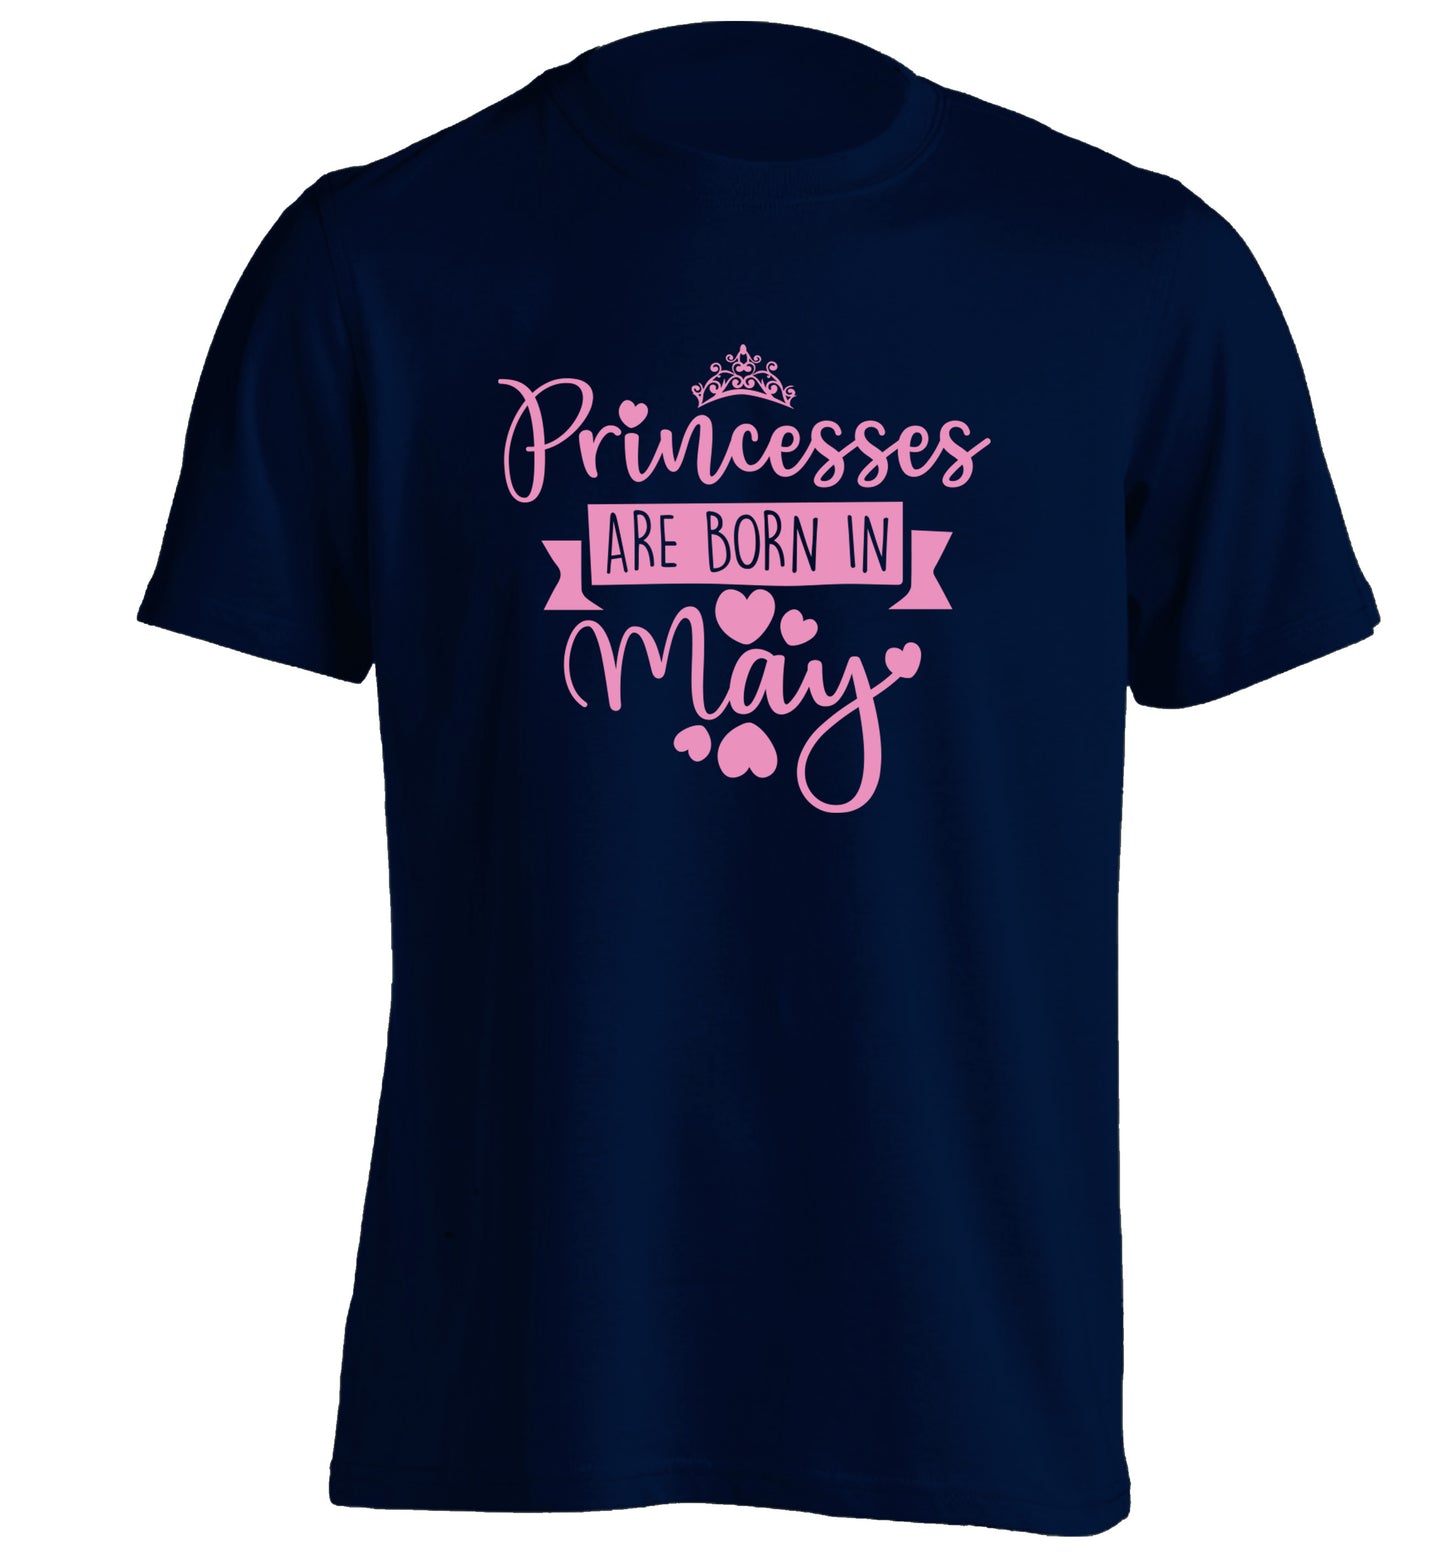 Princesses are born in May adults unisex navy Tshirt 2XL